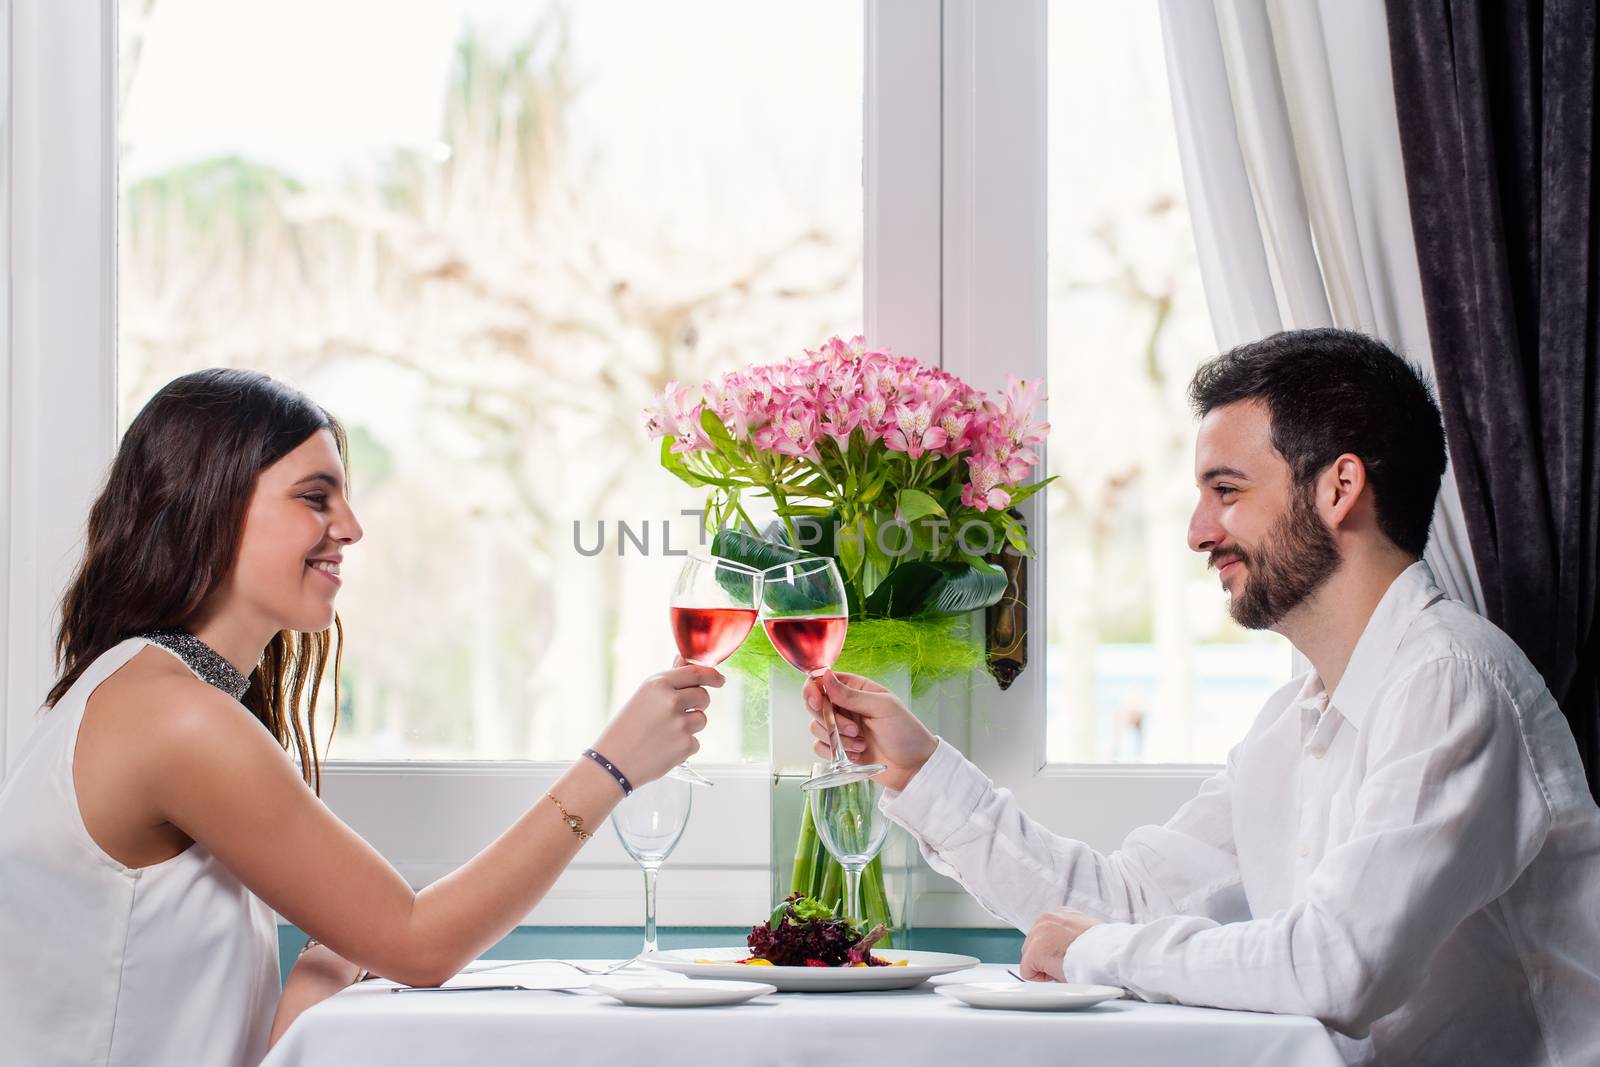 Close up portrait of elegant young couple having romantic dinner in restaurant. Couple sitting next to window with colorful flower bouquet and making a toast with rose wine.